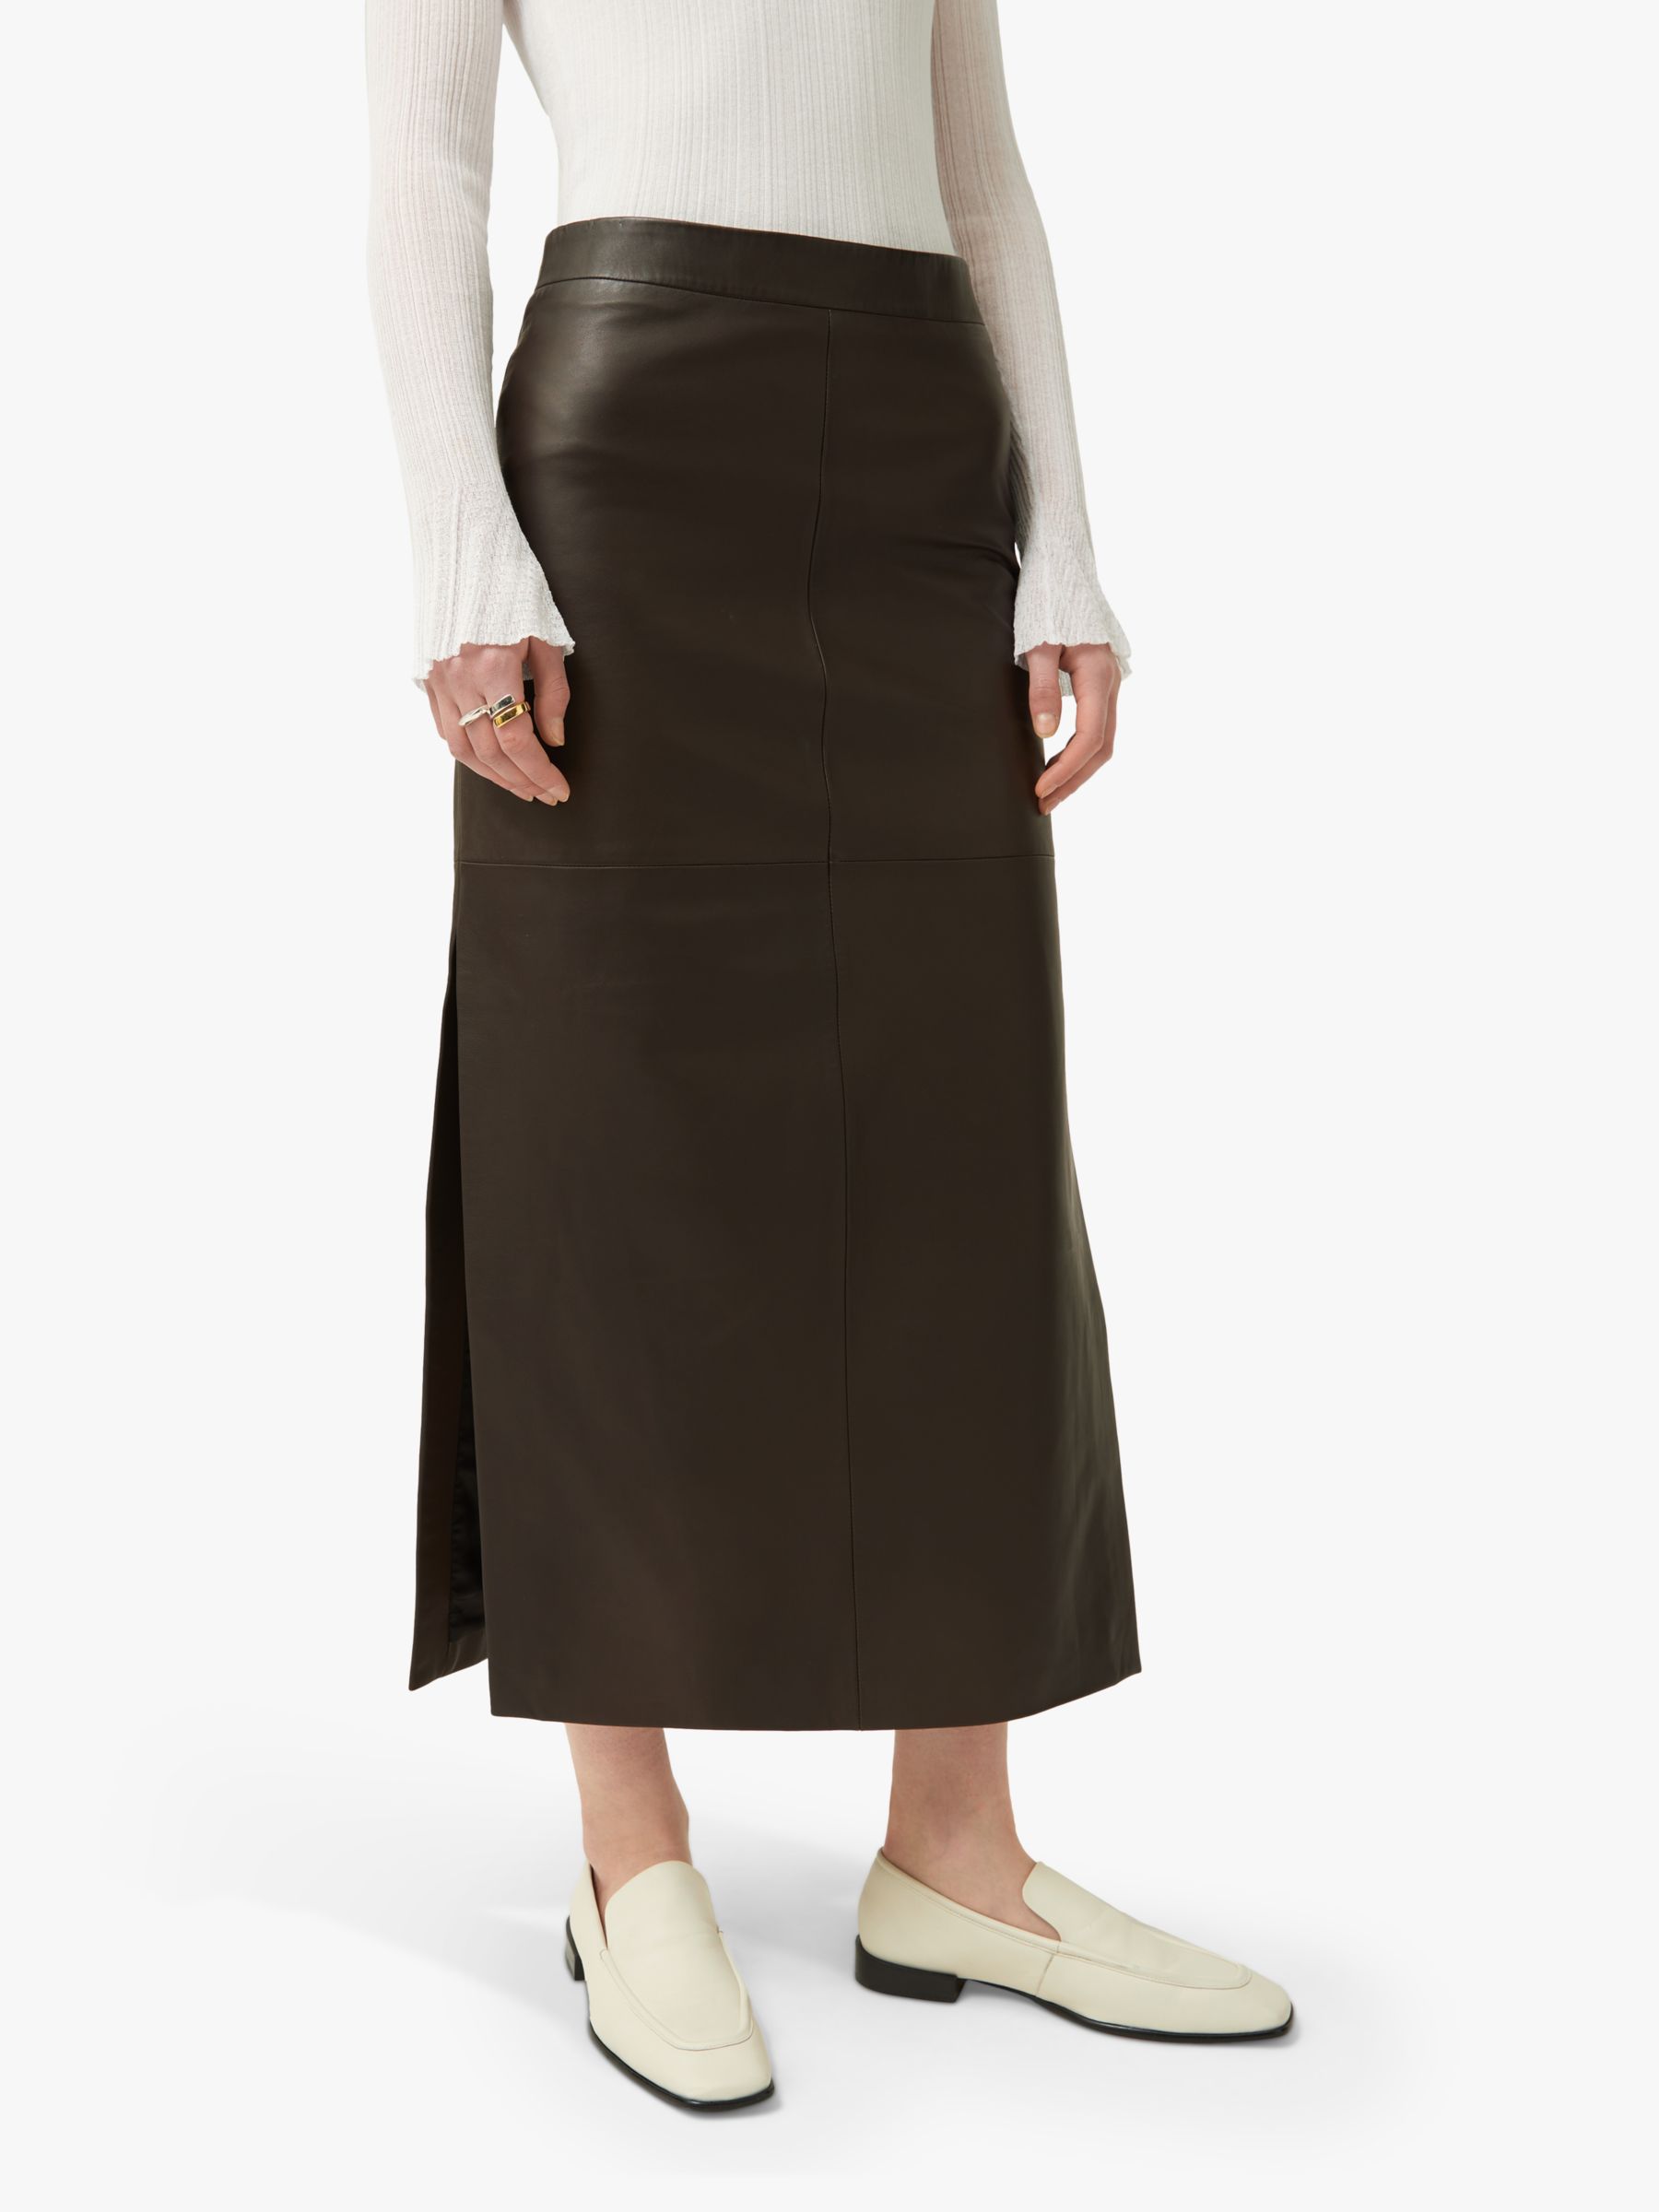 Tan Panelled Leather Skirt, WHISTLES